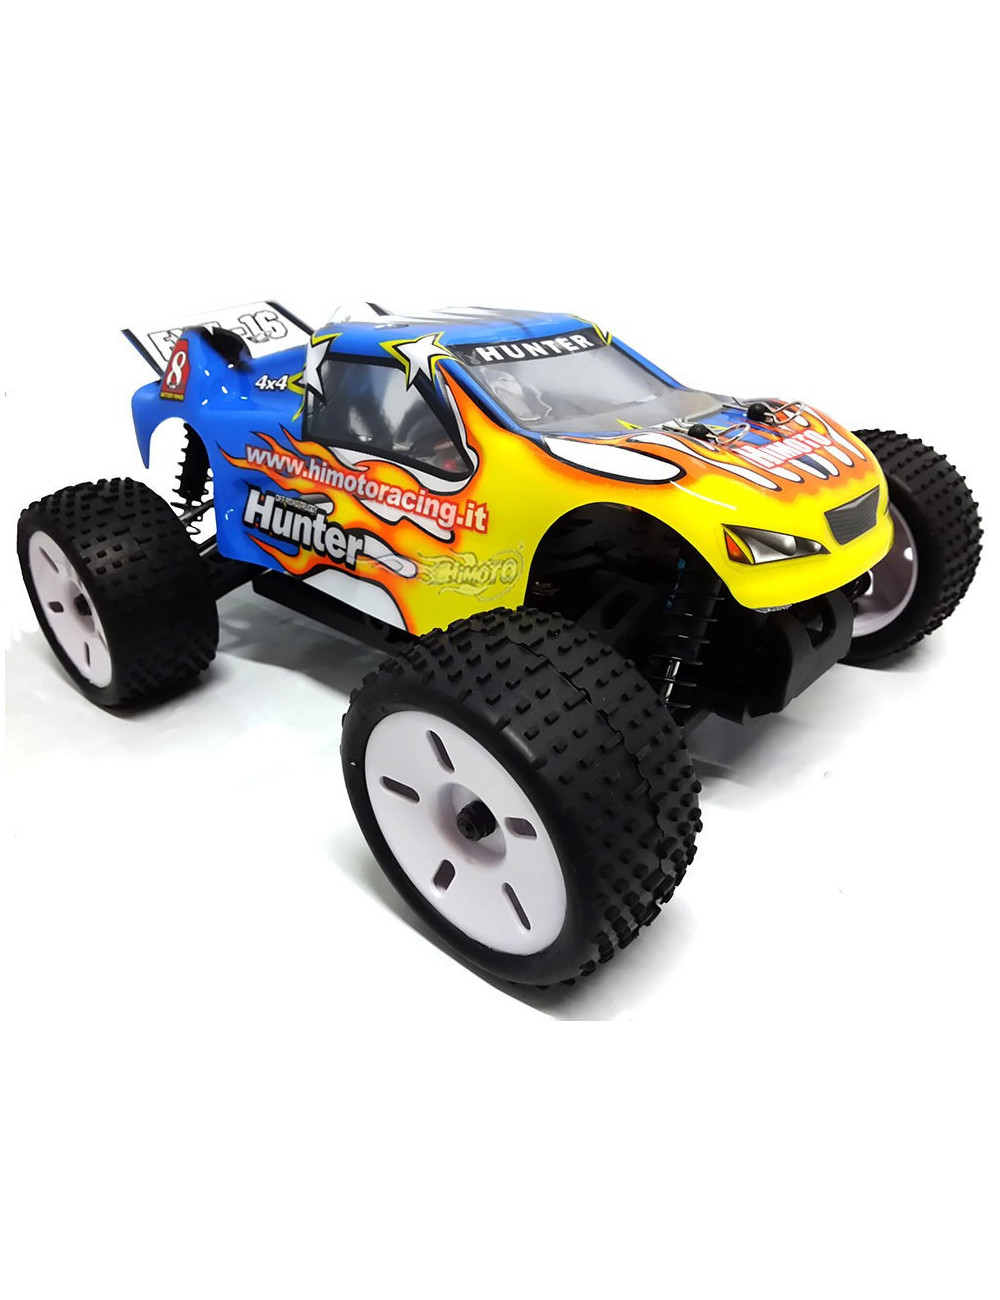 TRUGGY EXT-16 HIMOTO 1/16 2.4GHZ 4WD RTR